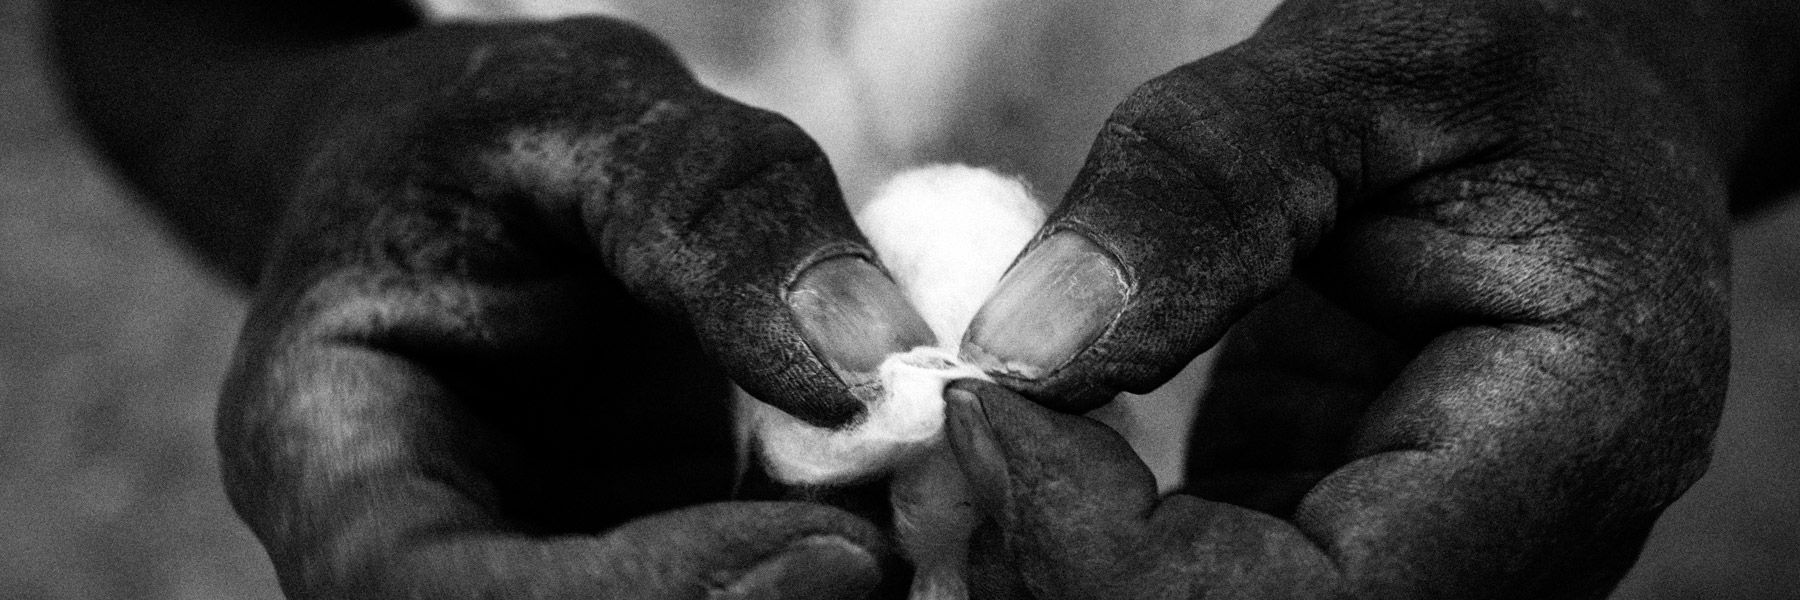 A farmer is seen extracting the seed out of the cotton crop, in Boromo. Image by Jošt Franko. Burkina Faso, 2015.